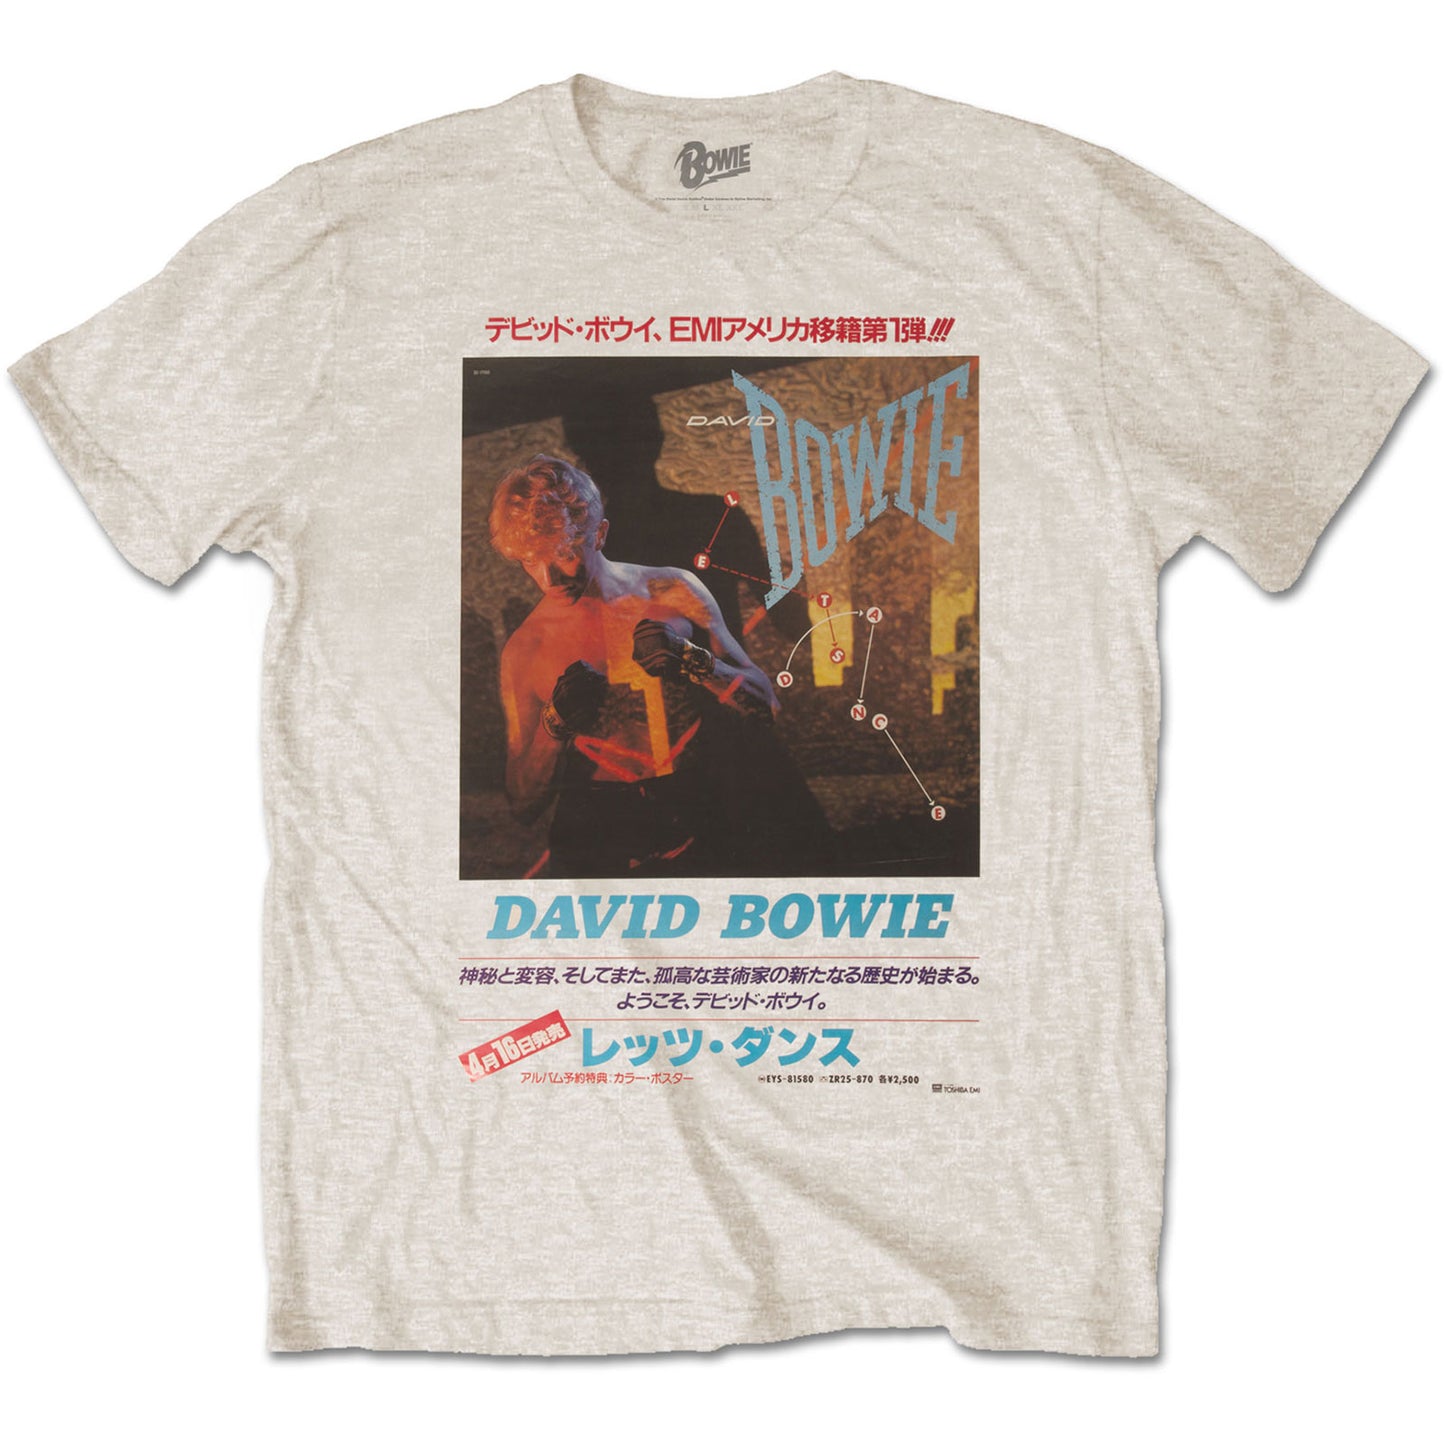 David Bowie Let's Dance Japanese Text Tee